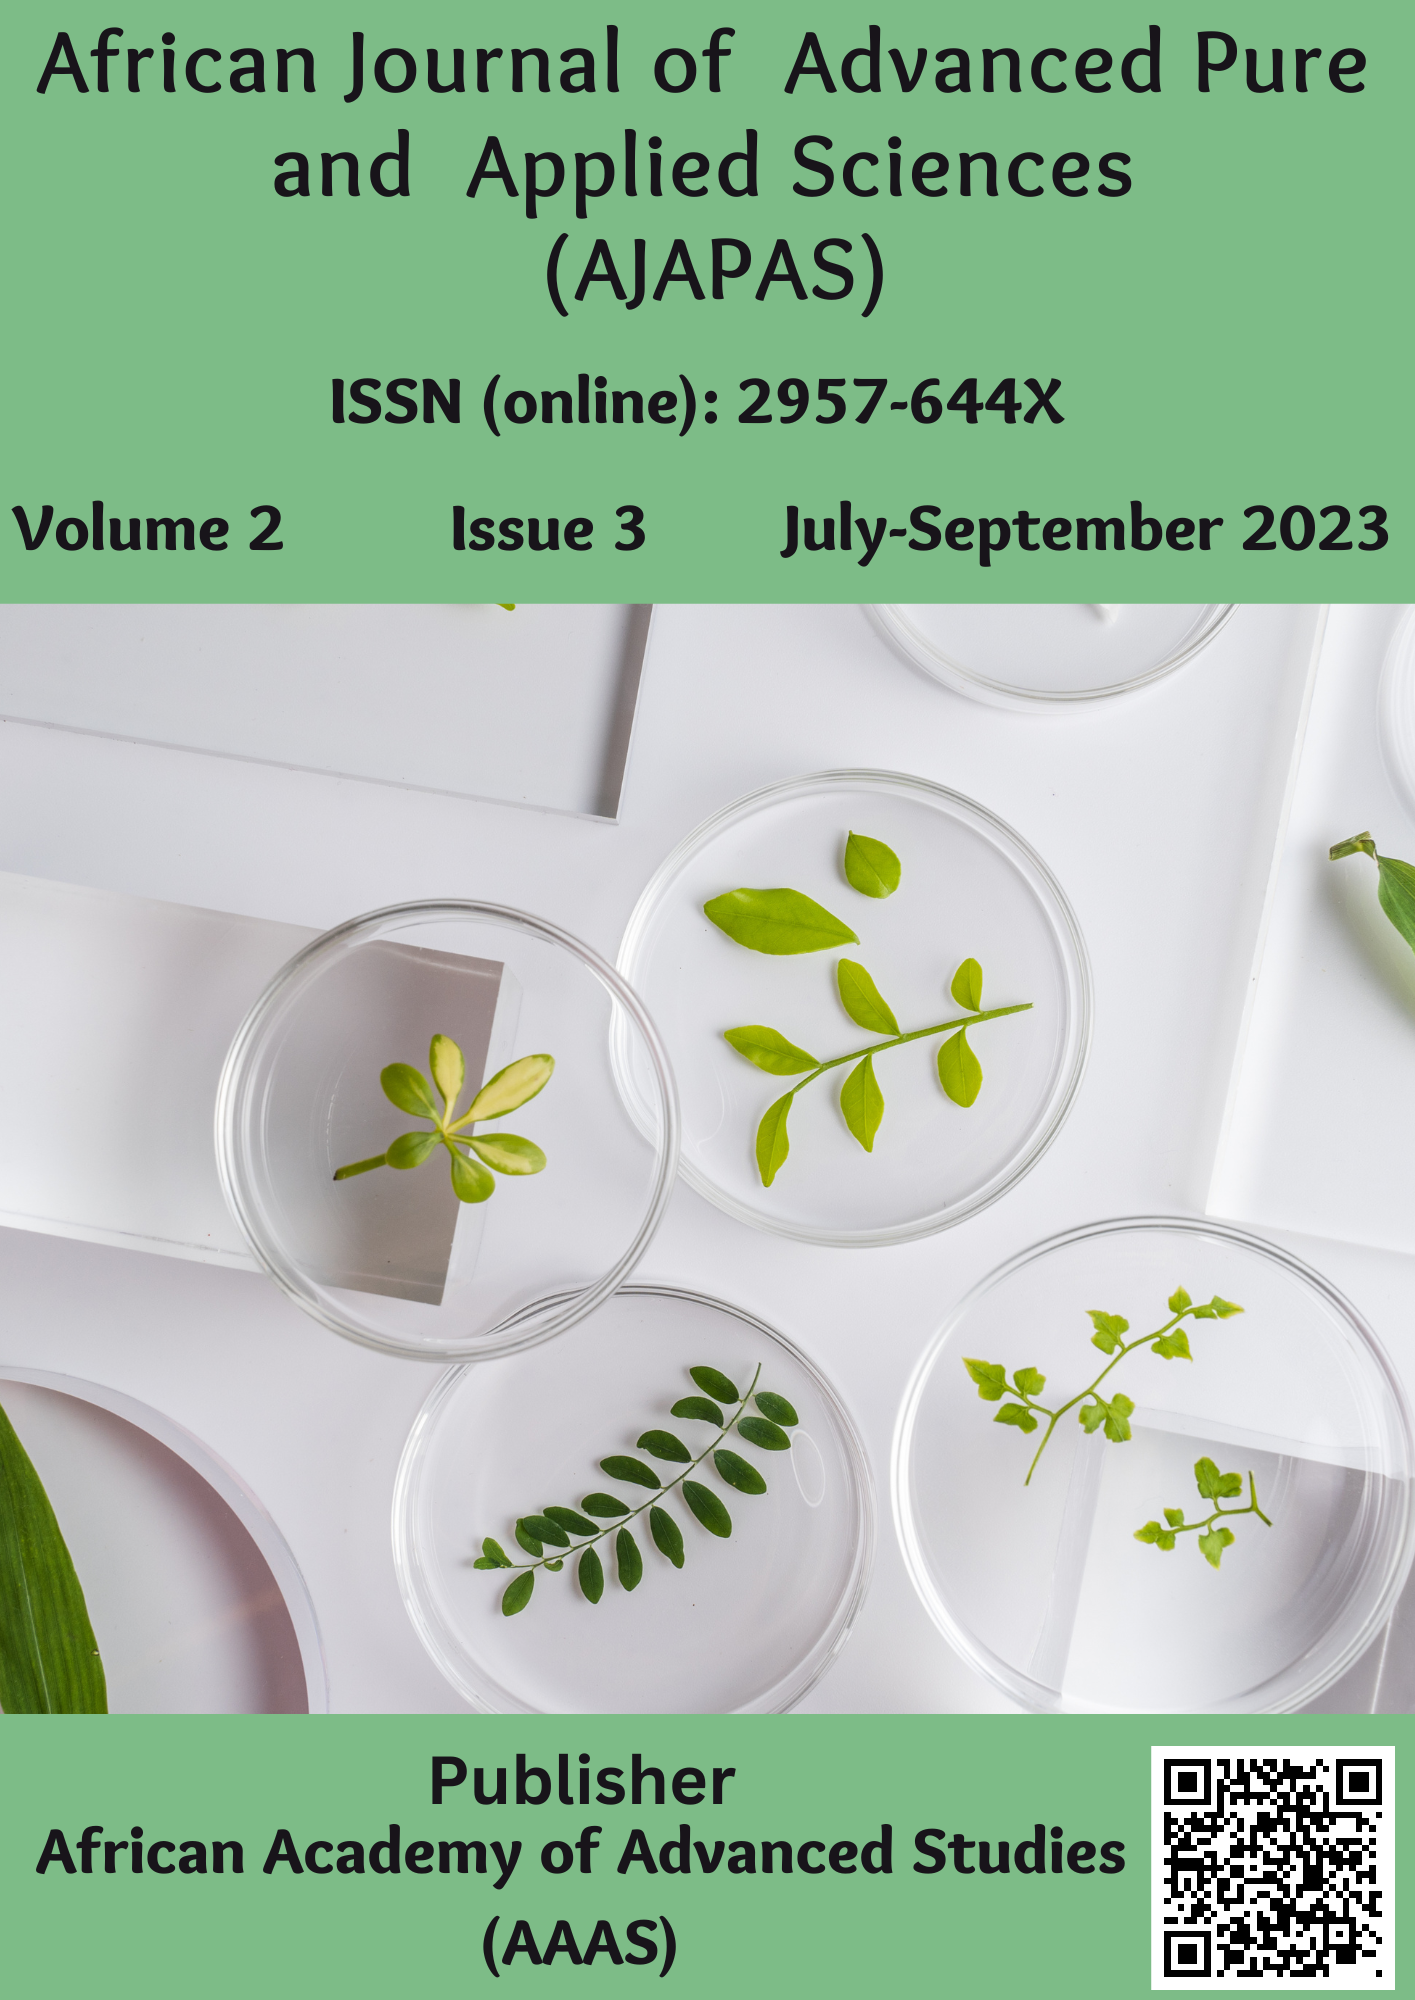 					View Volume 2, Issue 3, July - September 2023
				